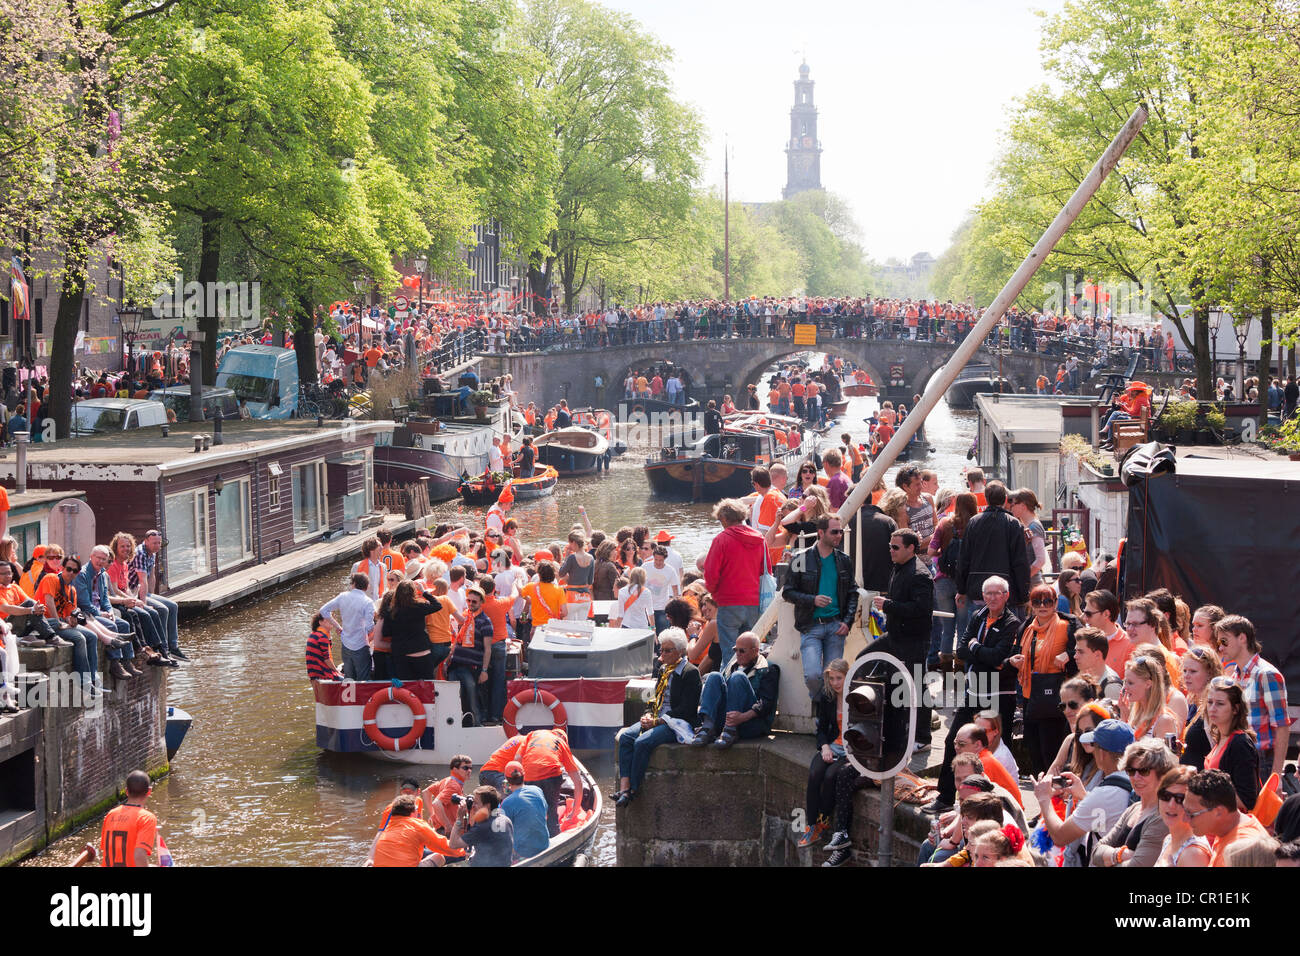 Kingsday King's Day Kings Day birthday in Amsterdam. Canal Parade in the Prinsengracht. Boats people wearing orange, partying. Stock Photo